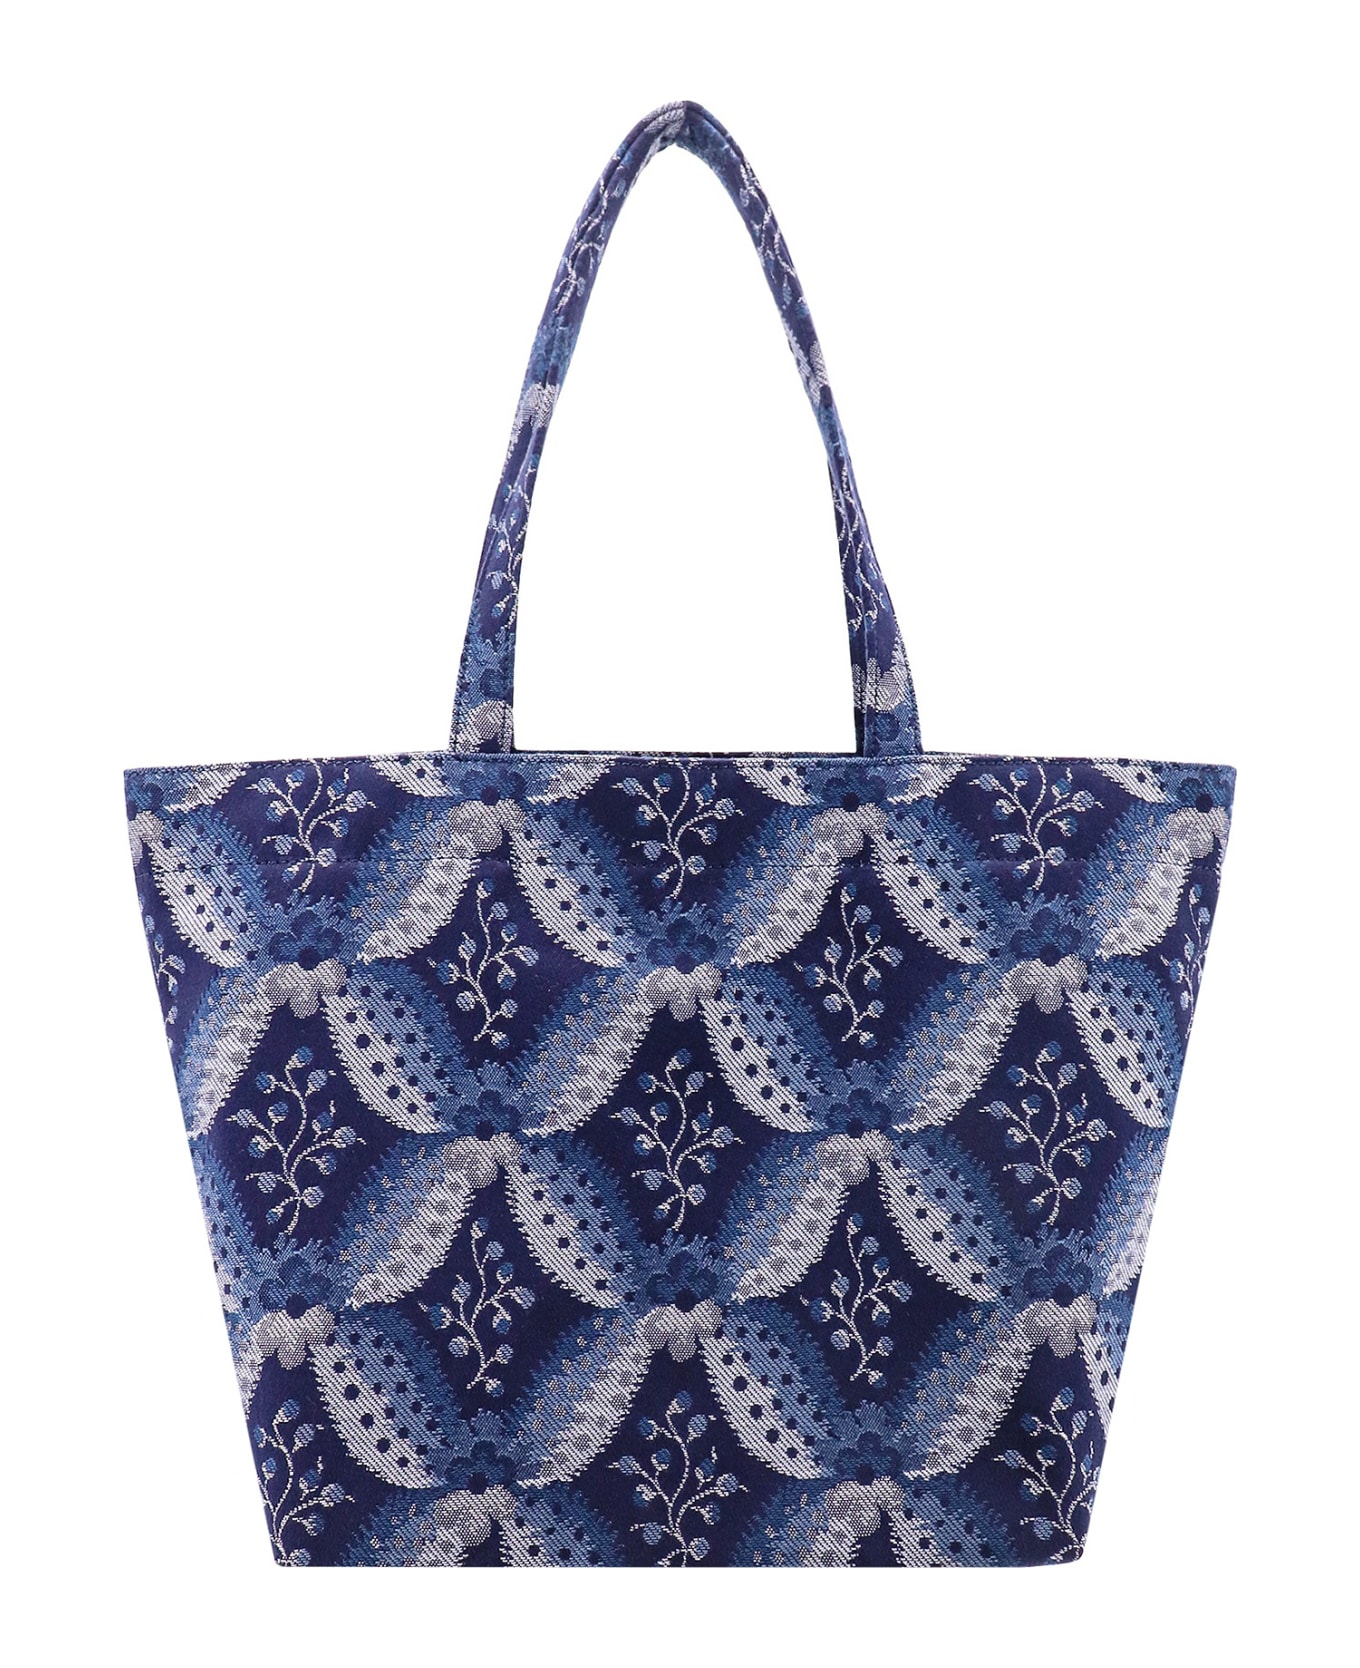 Etro Embroidered Canvas Medium Soft Trotter Shopping Bag - Blue ショルダーバッグ